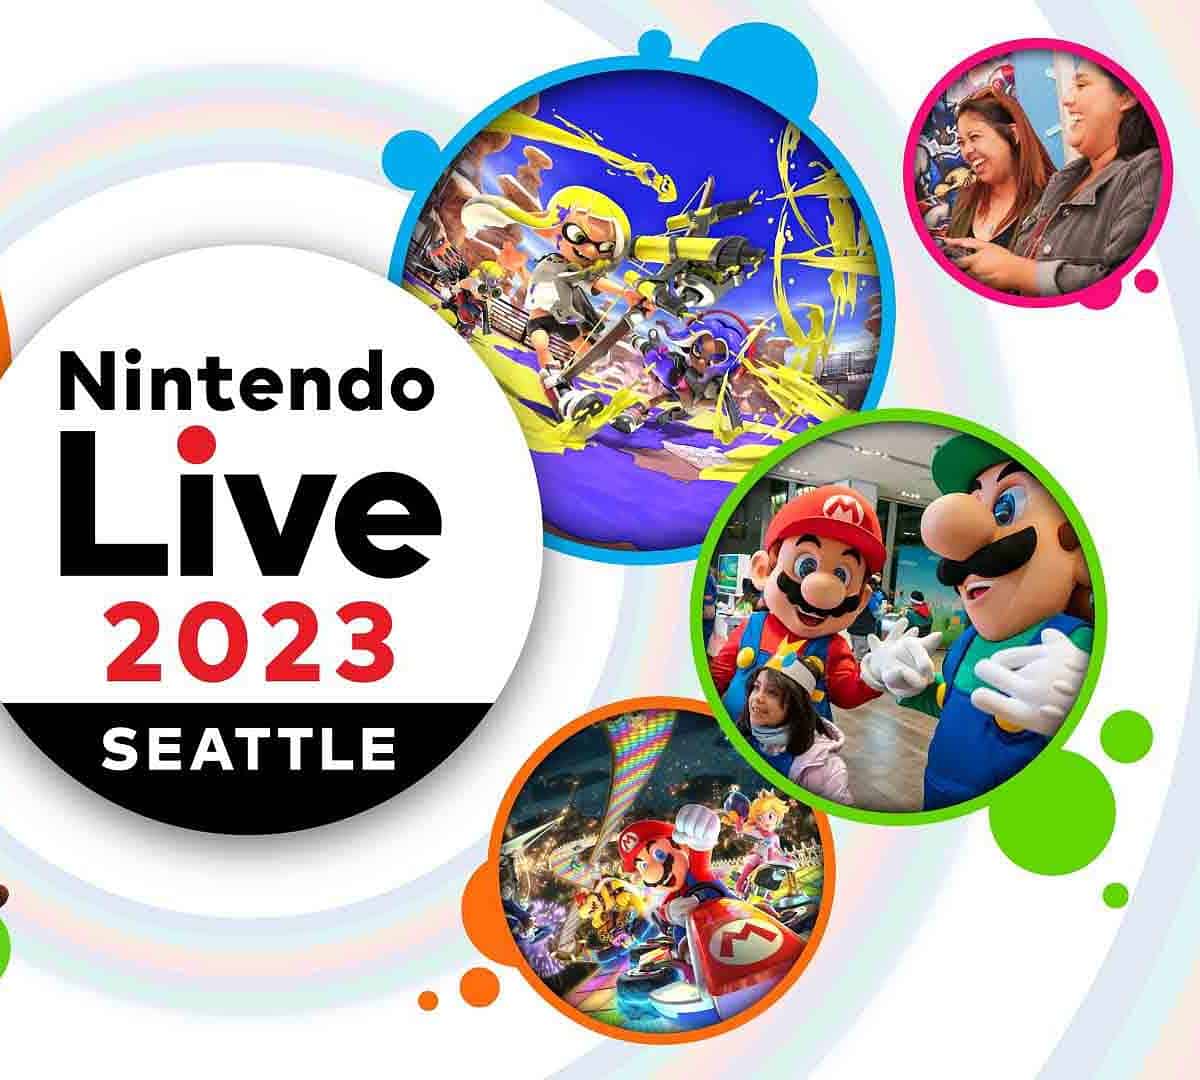 Nintendo Live 2023 event announced for this September in Seattle